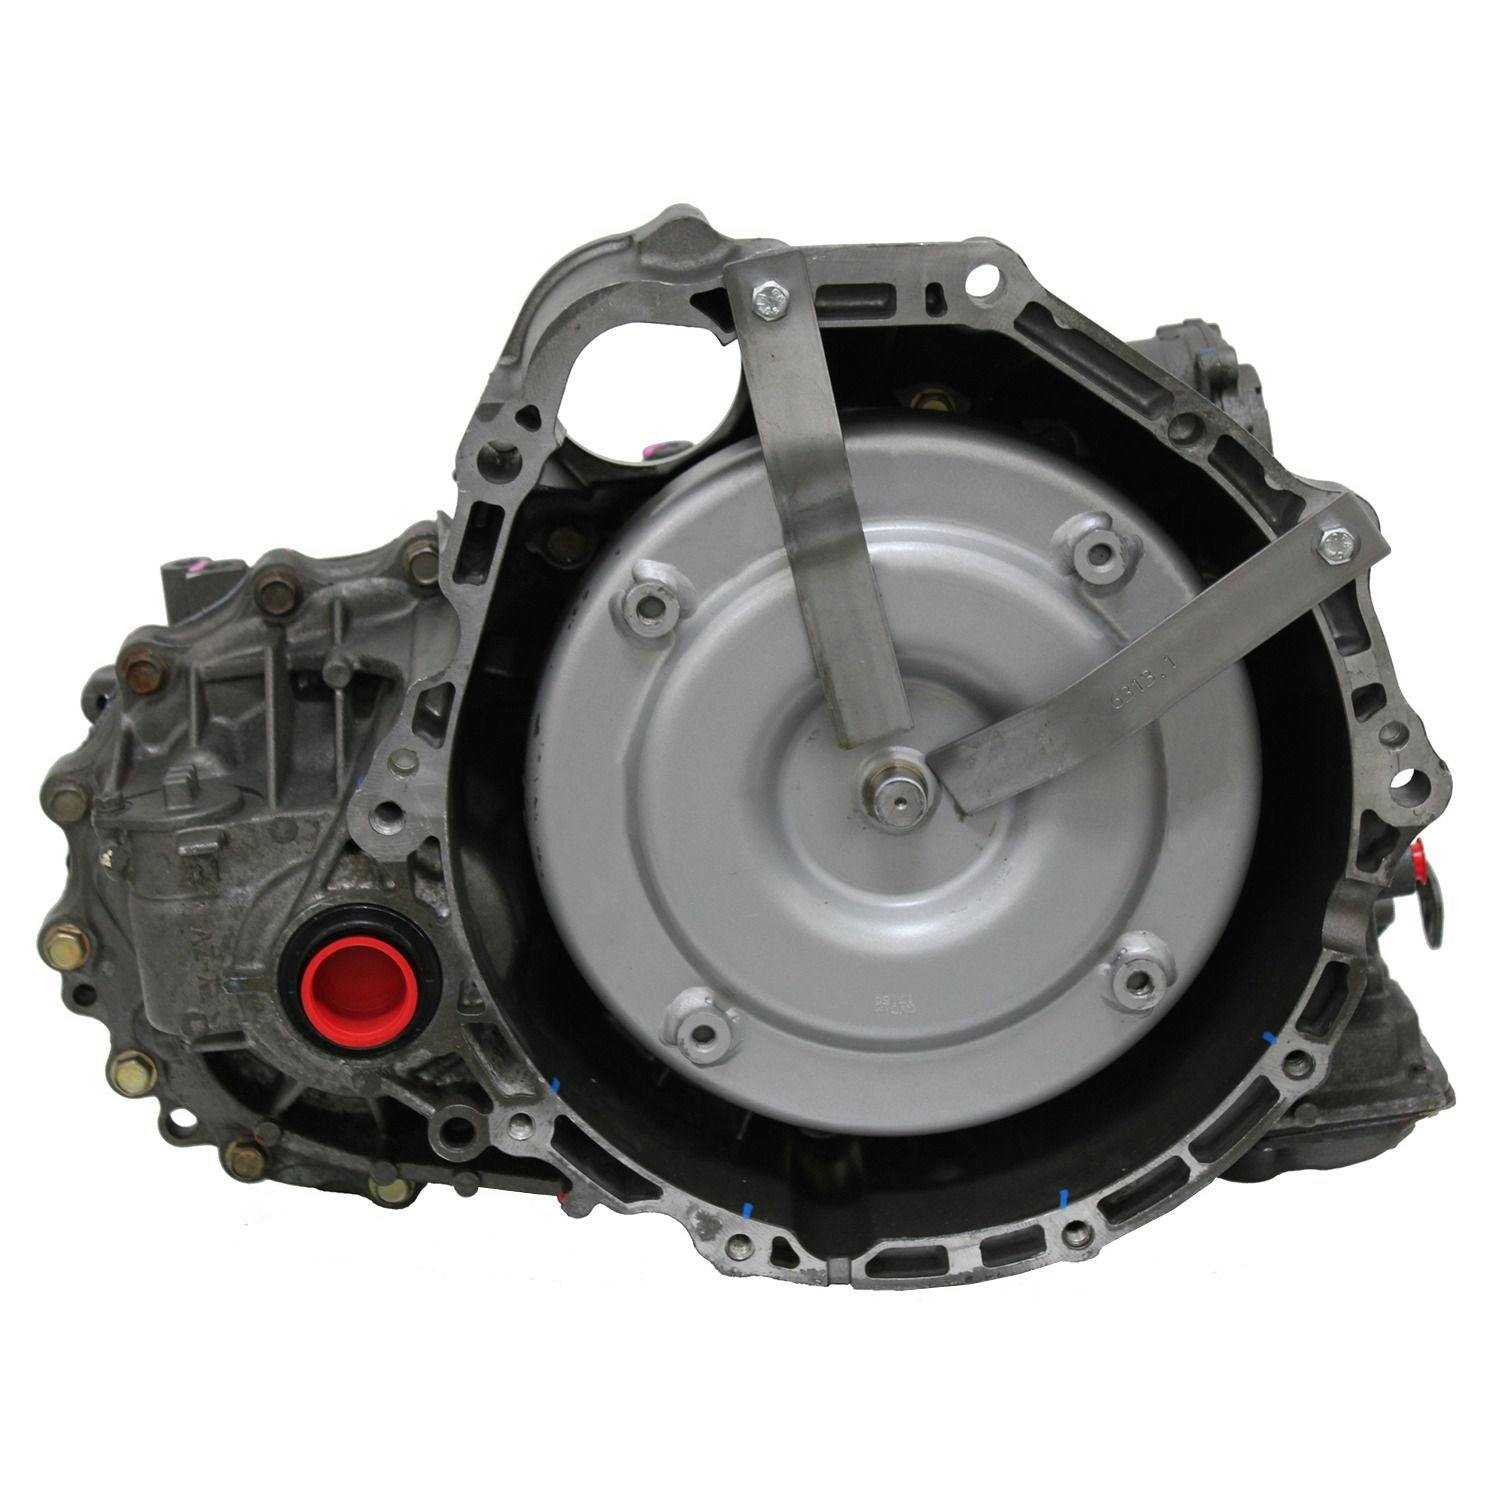 Automatic Transmission for 2000-2006 Nissan Sentra FWD with 1.8L Inline-4 Engine